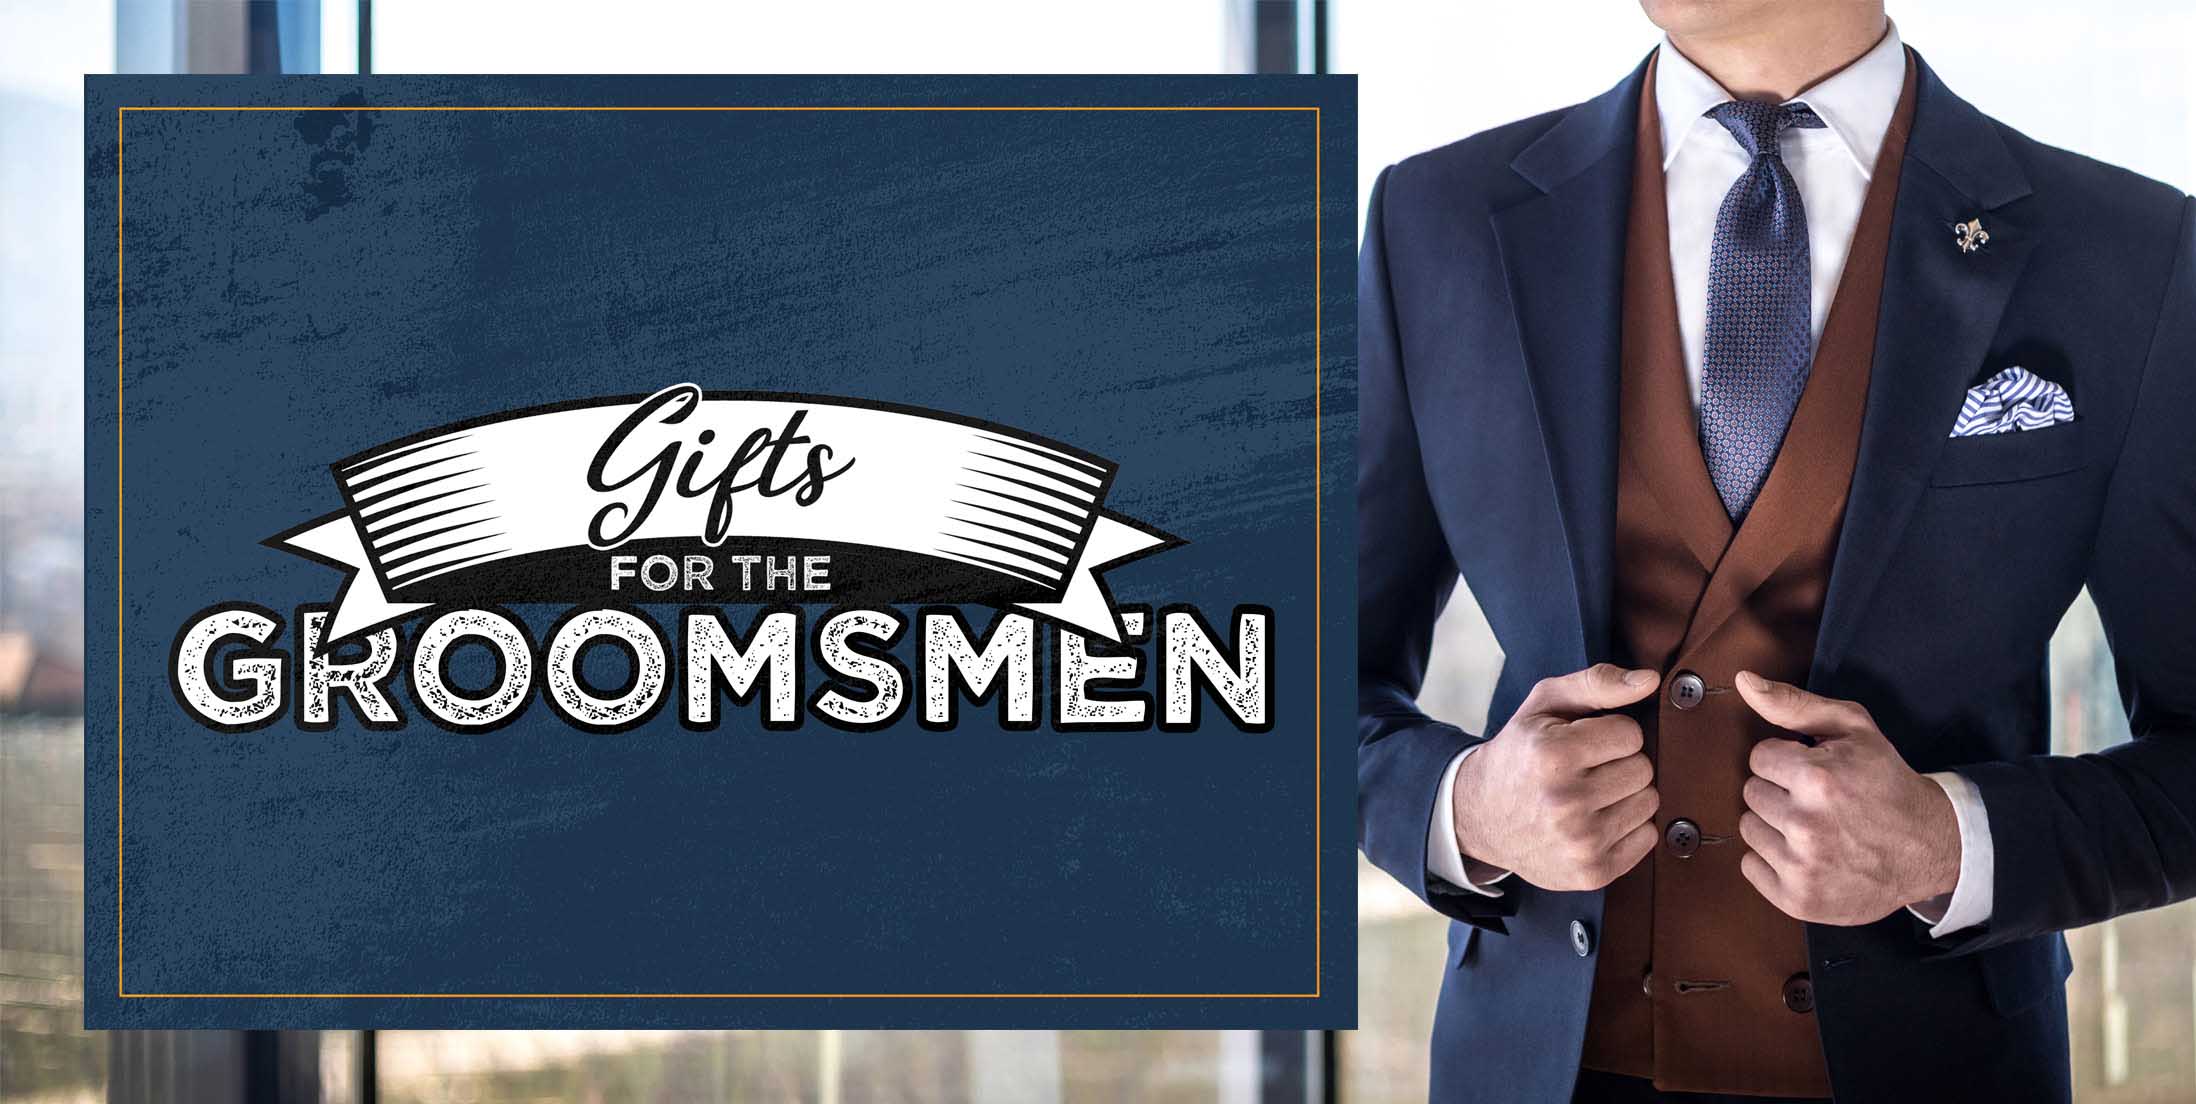 Gifts for the Groomsmen